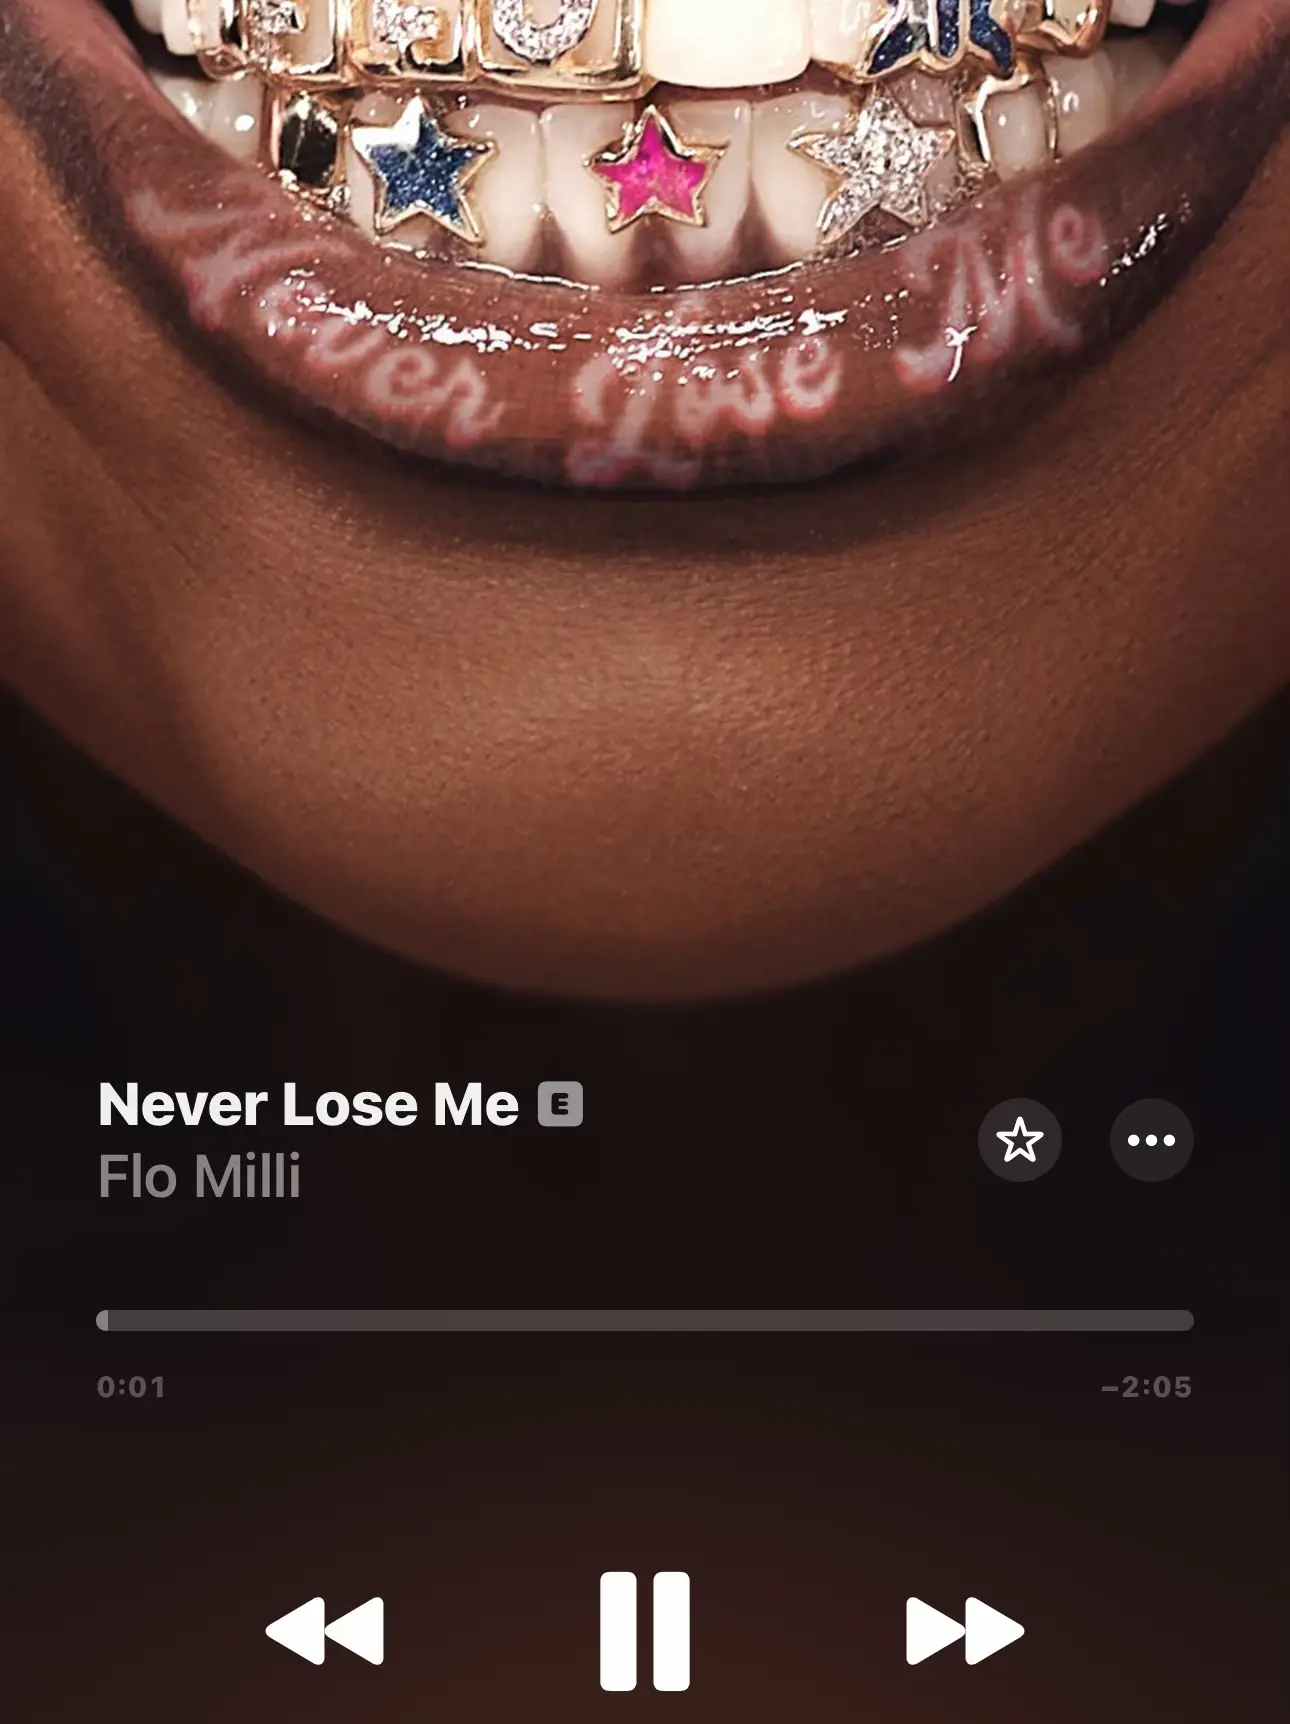  A picture of a person's mouth with the words "never lose me" and "flo milli" written above it.